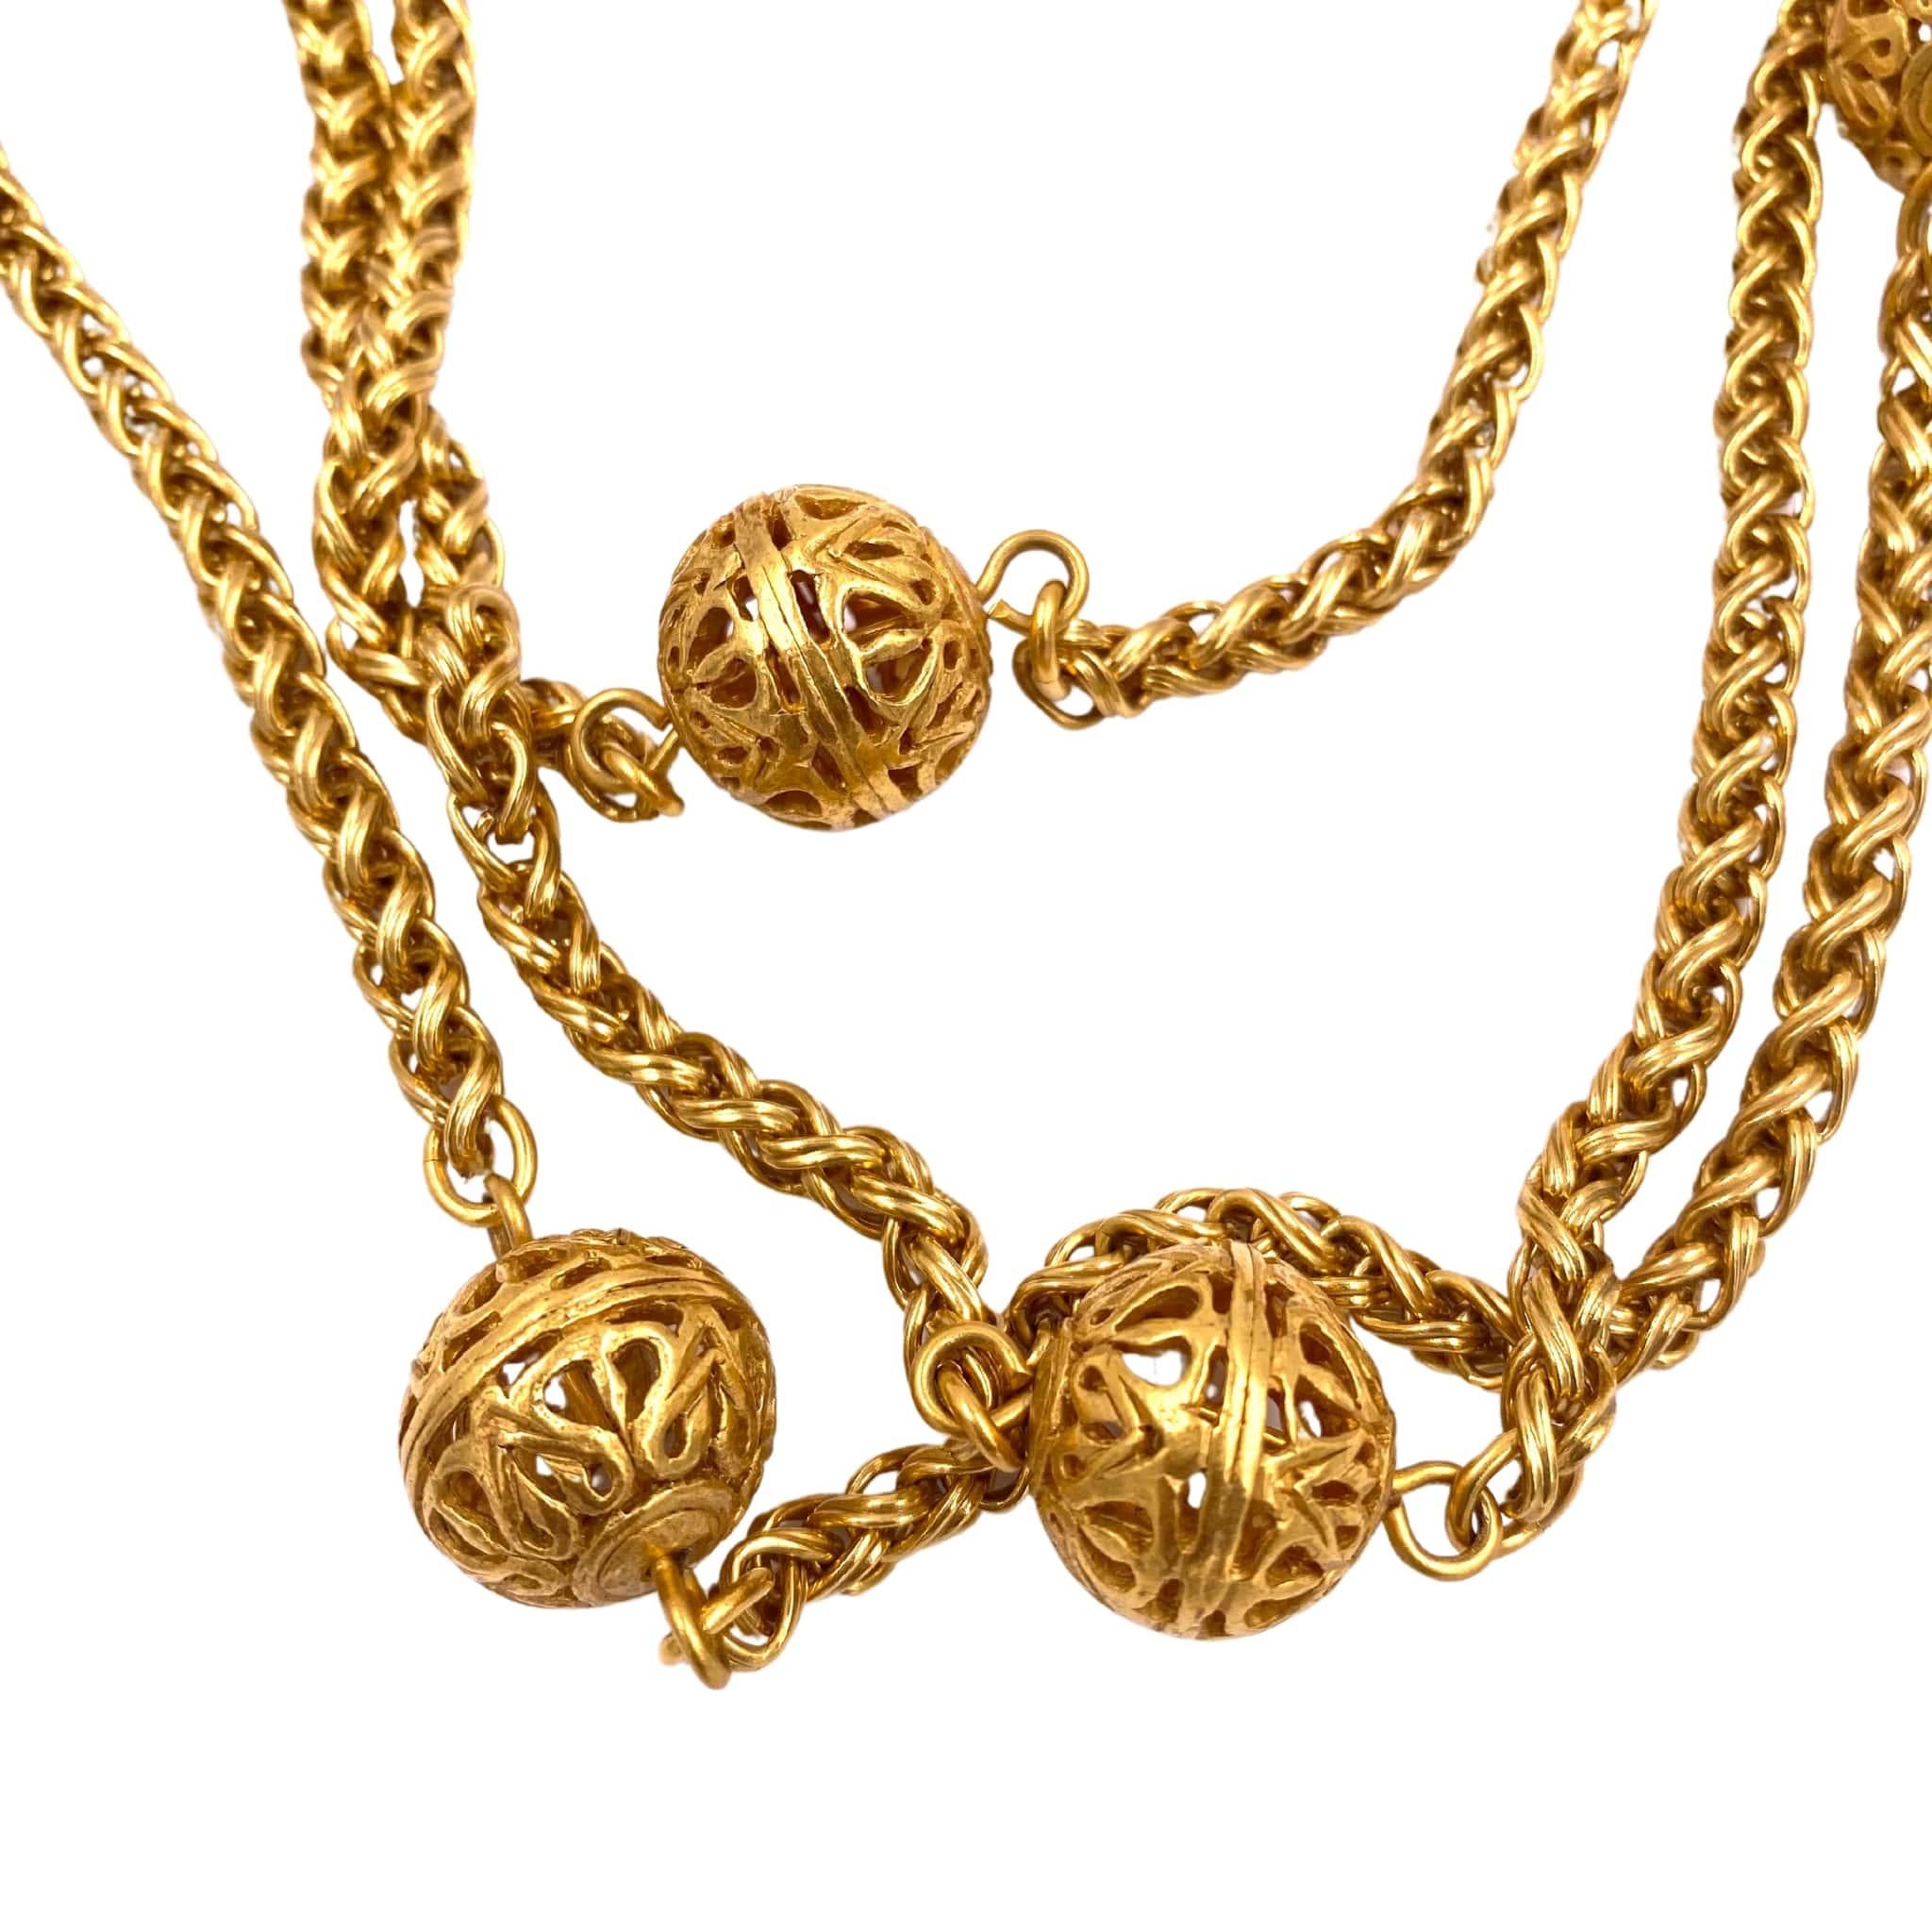 Chanel 1995 Gold Long Chain with Filigree Balls In Excellent Condition For Sale In Los Angeles, CA